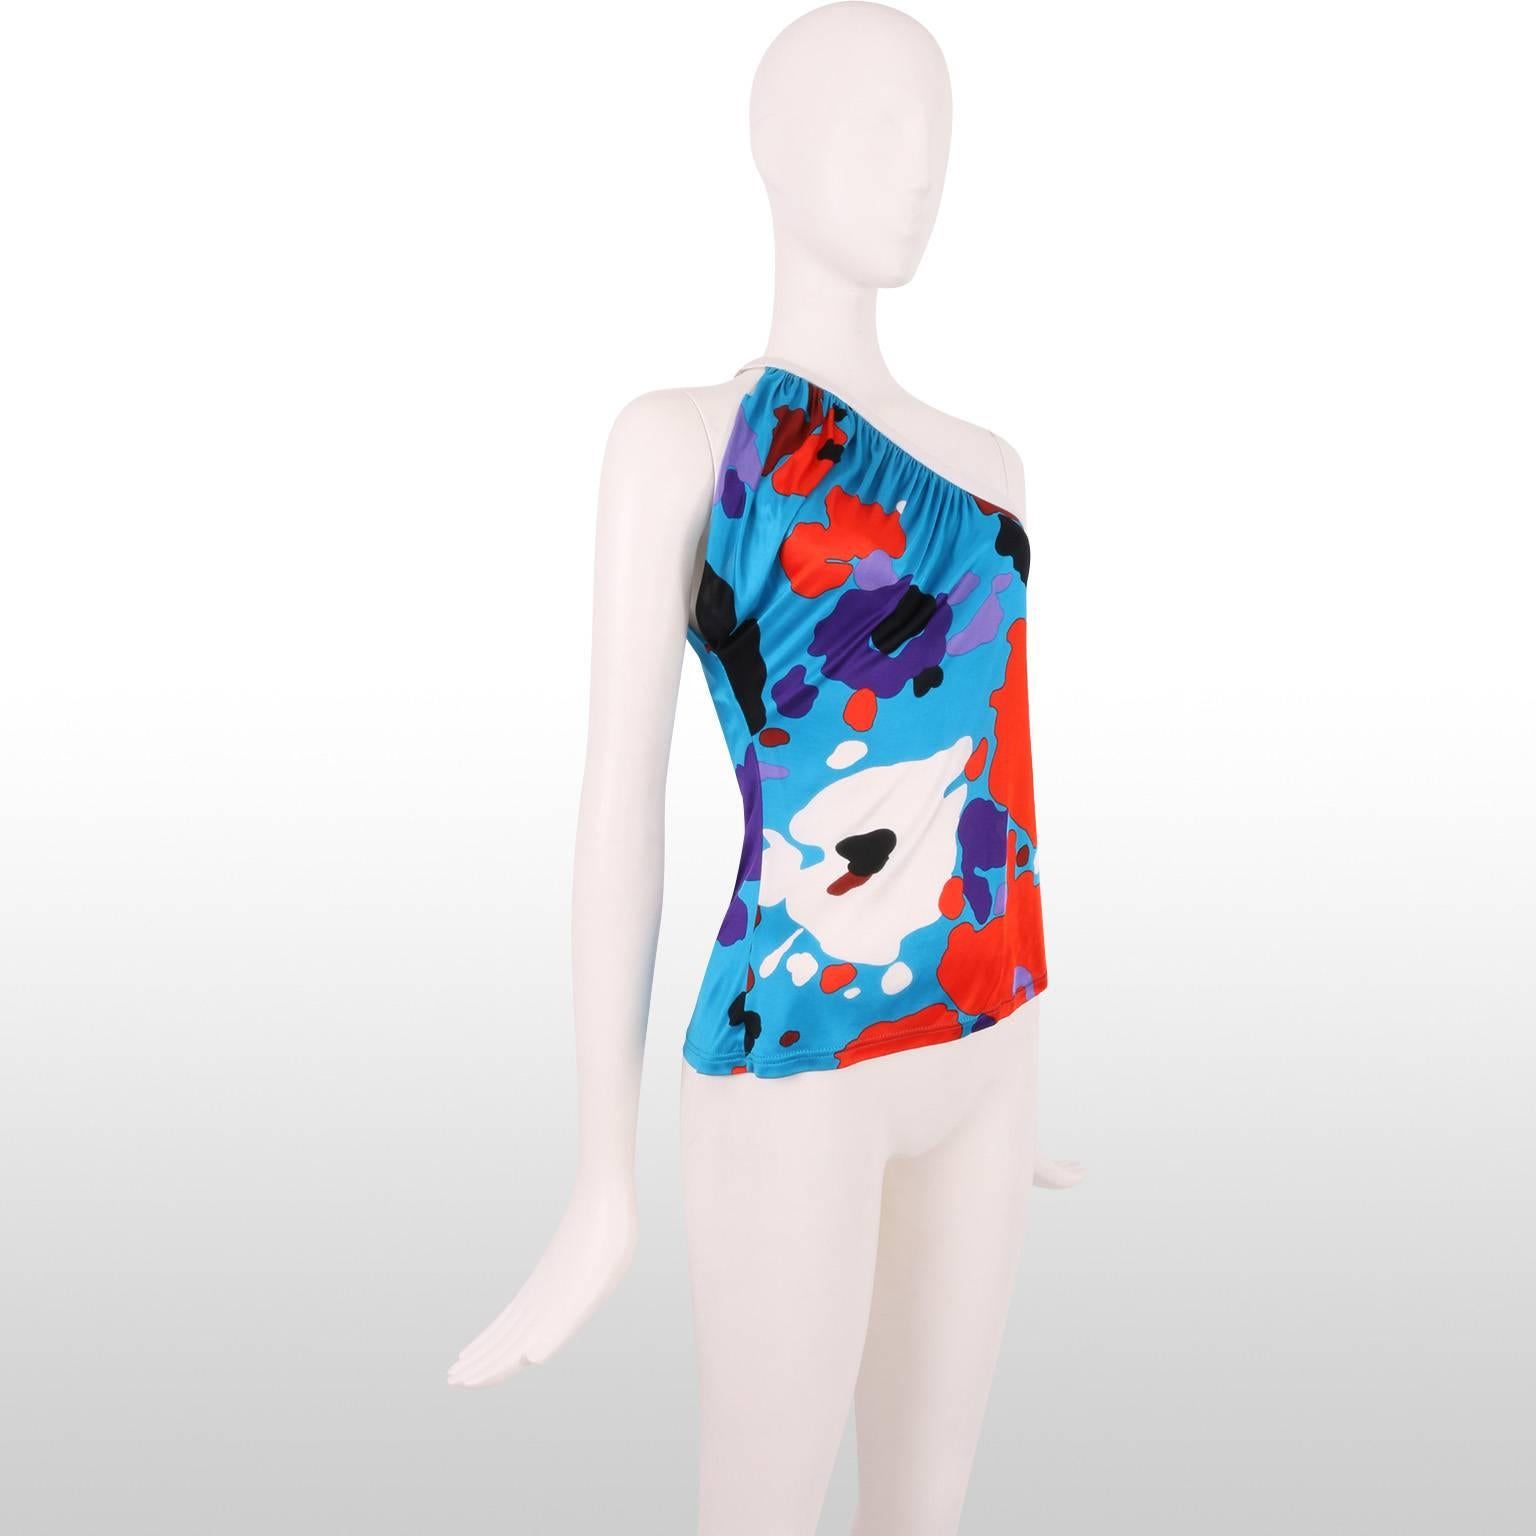 This fun John Galliano one shoulder top has abstract floral prints over a bright electric blue background. The piece drapes beautifully across the bust at a flattering angle and is therefore easy and comfortable to wear. Sexy and quirky, this top